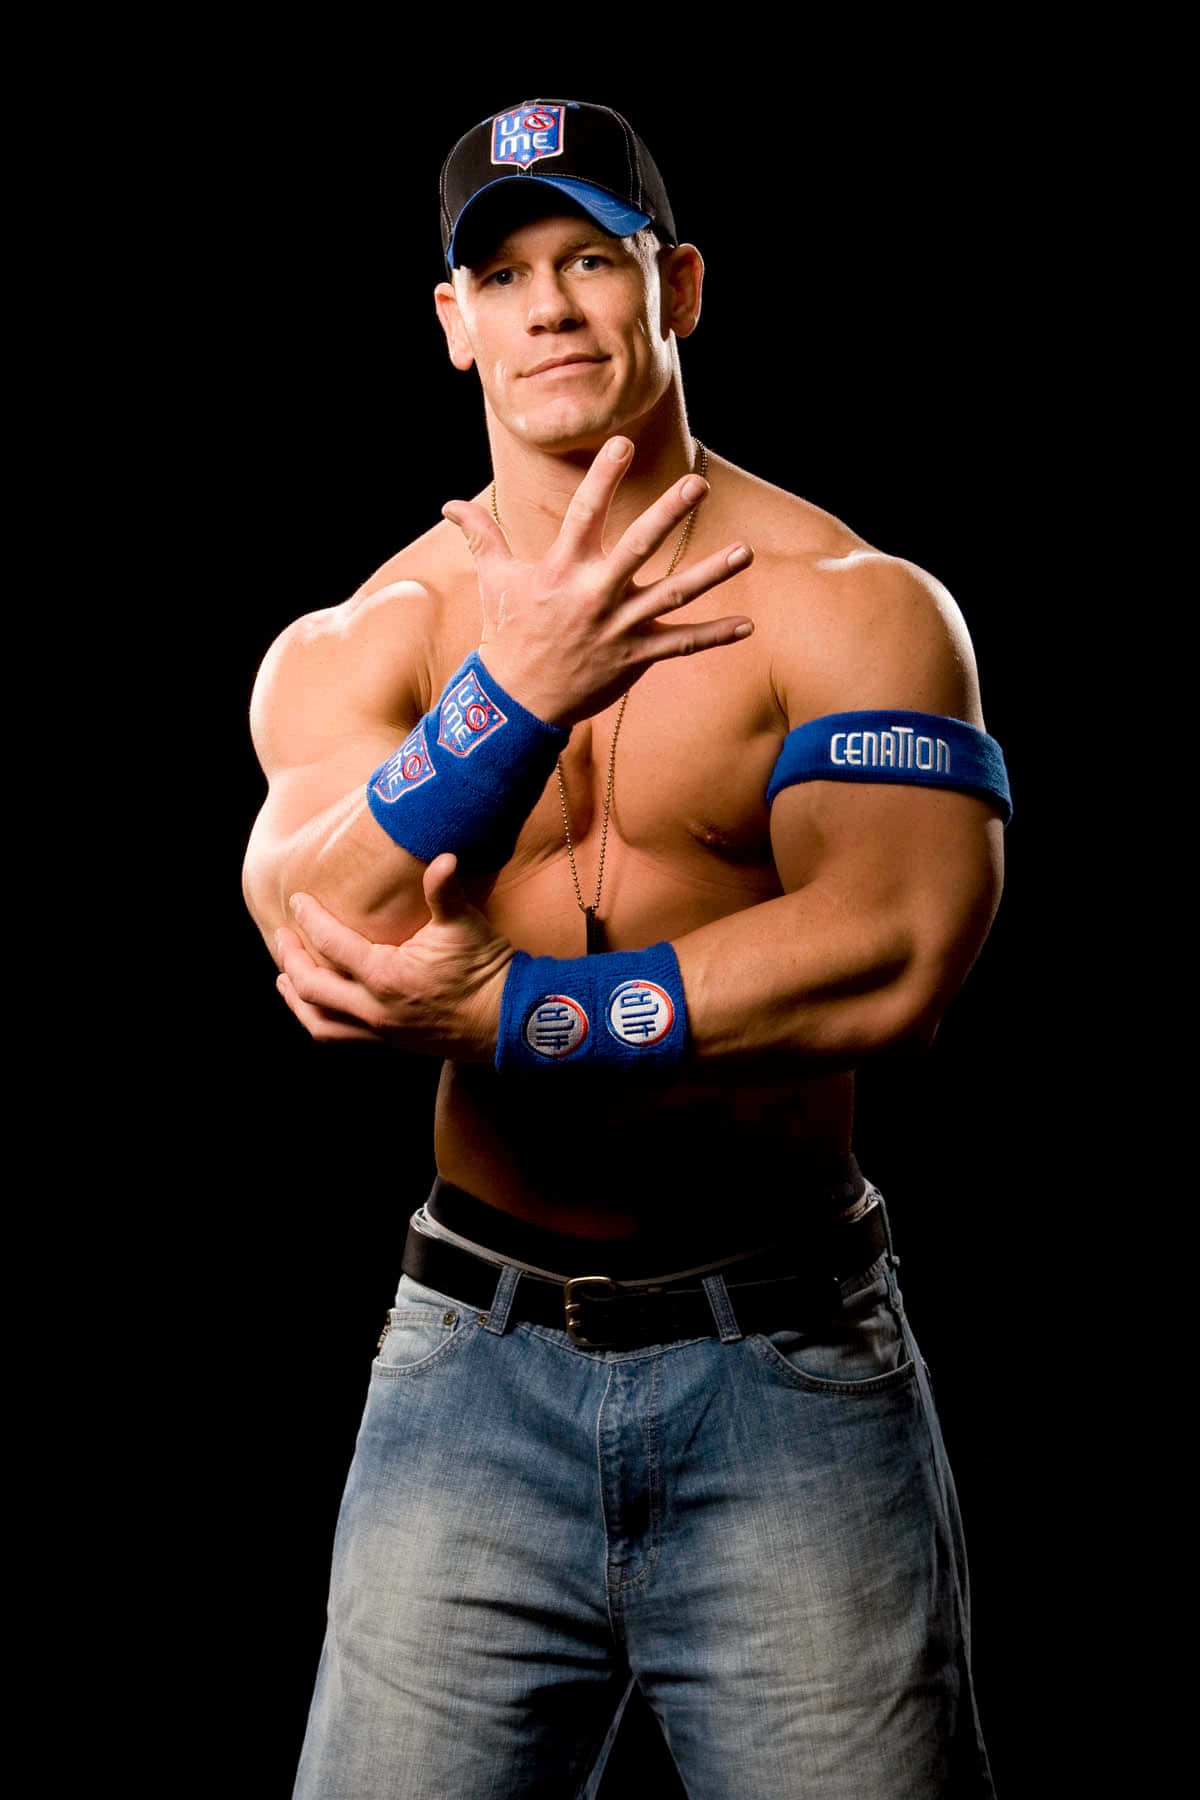 John Cena standing strong and confident in the ring.